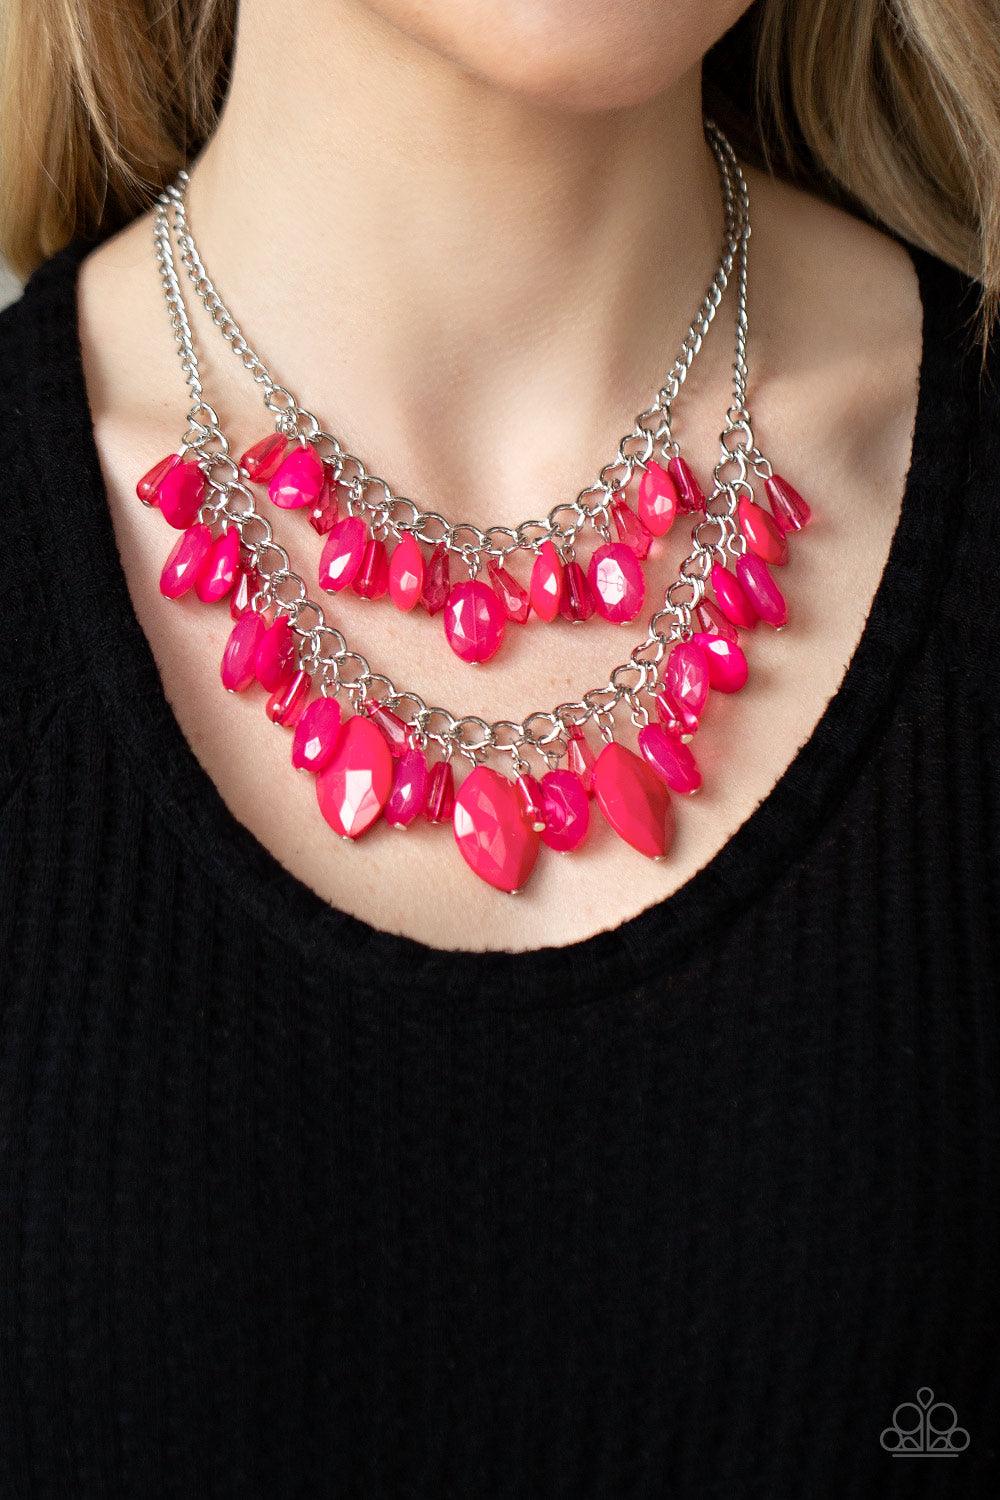 Paparazzi Accessories Midsummer Mixer - Pink Varying in opacity, a vivacious collection of pink oval and teardrop acrylic and crystal-like beads cascade from two bold silver chains below the collar for a flirtatiously layered look. Features an adjustable